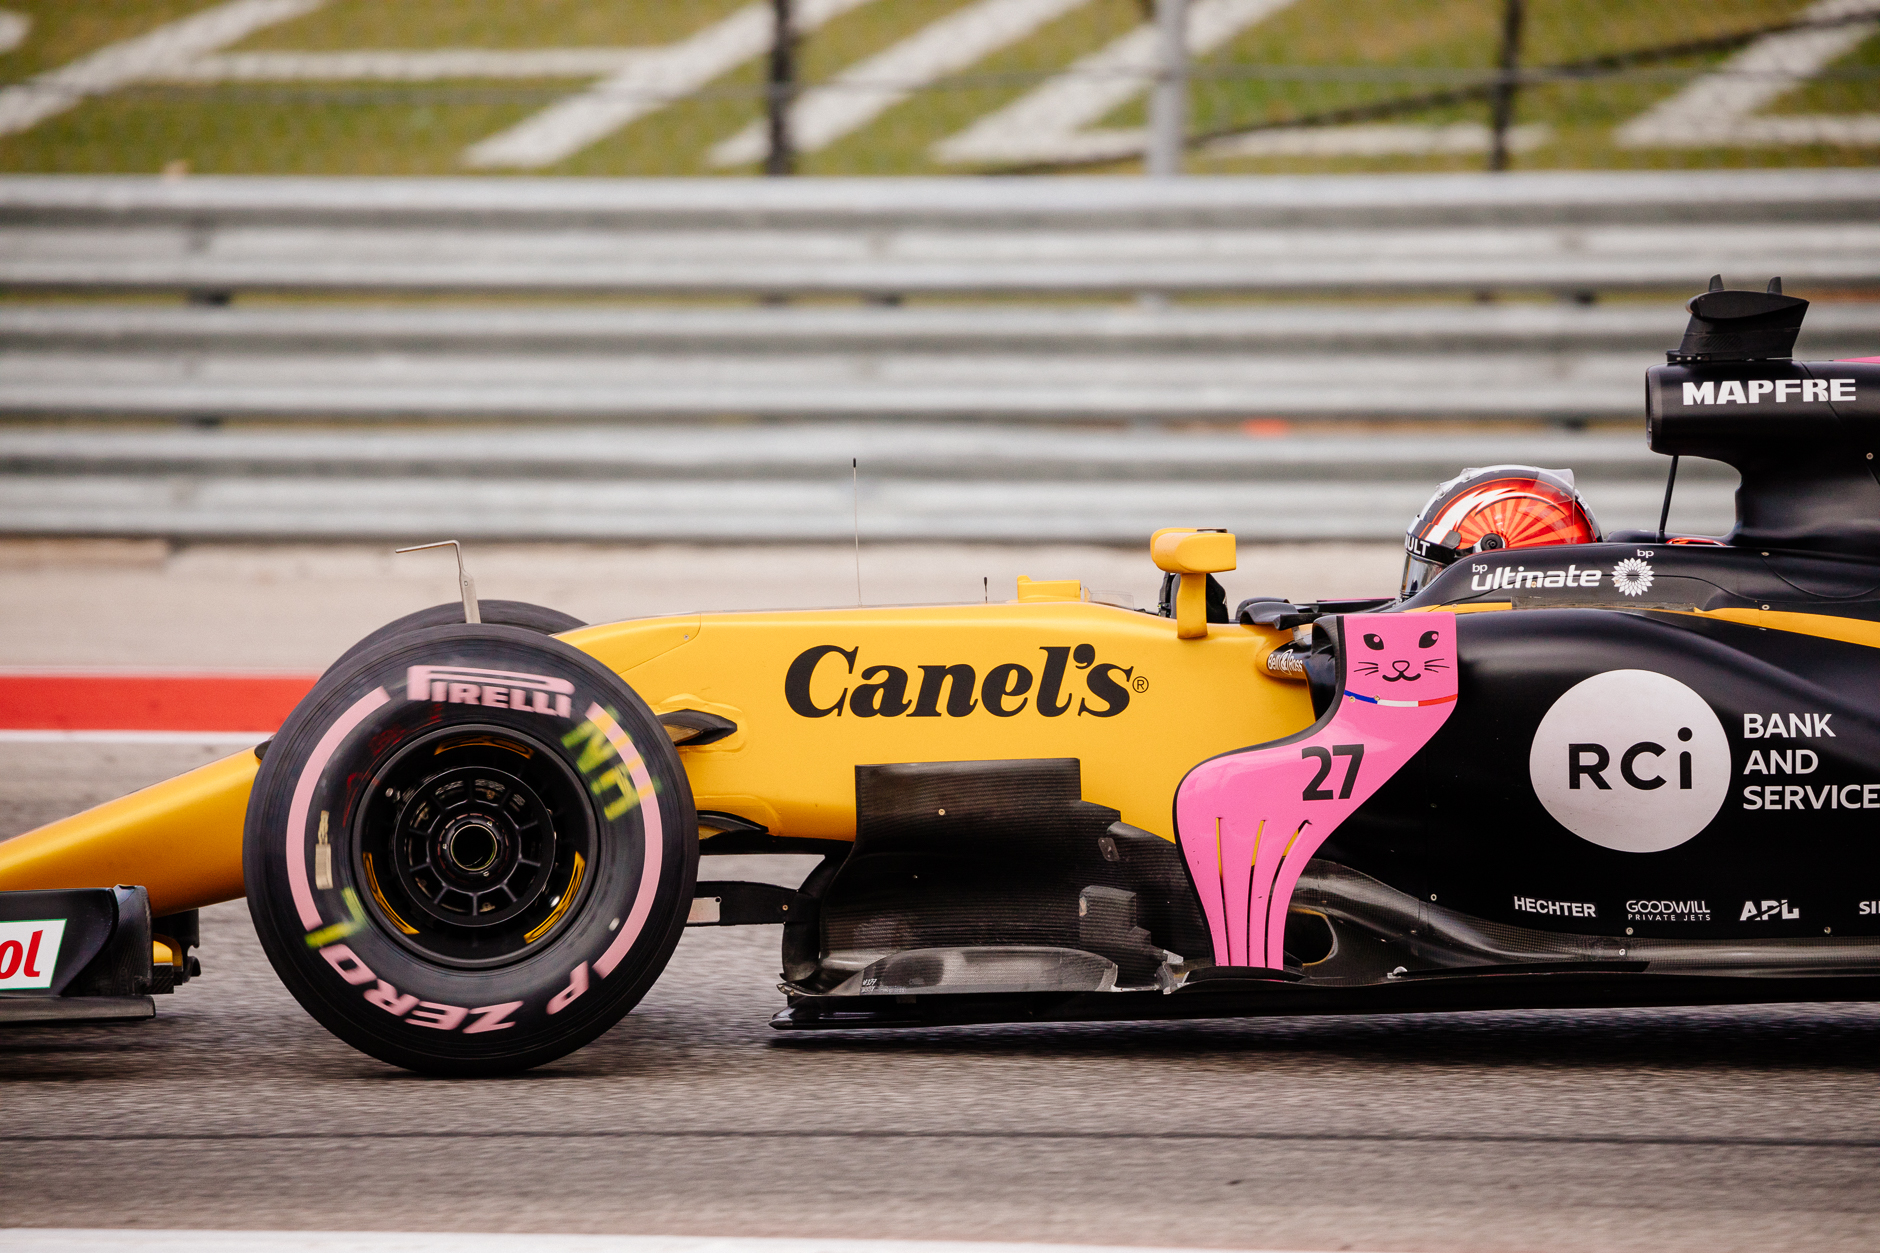 Through a partnership with the Susan G. Komen Foundation many elements of the weekend "went pink" to suppose Breast Cancer fundraising and awareness initiatives. This included some nods to the organization with special liveries, including this cute cat on the side of both Renault Sport F1 cars.